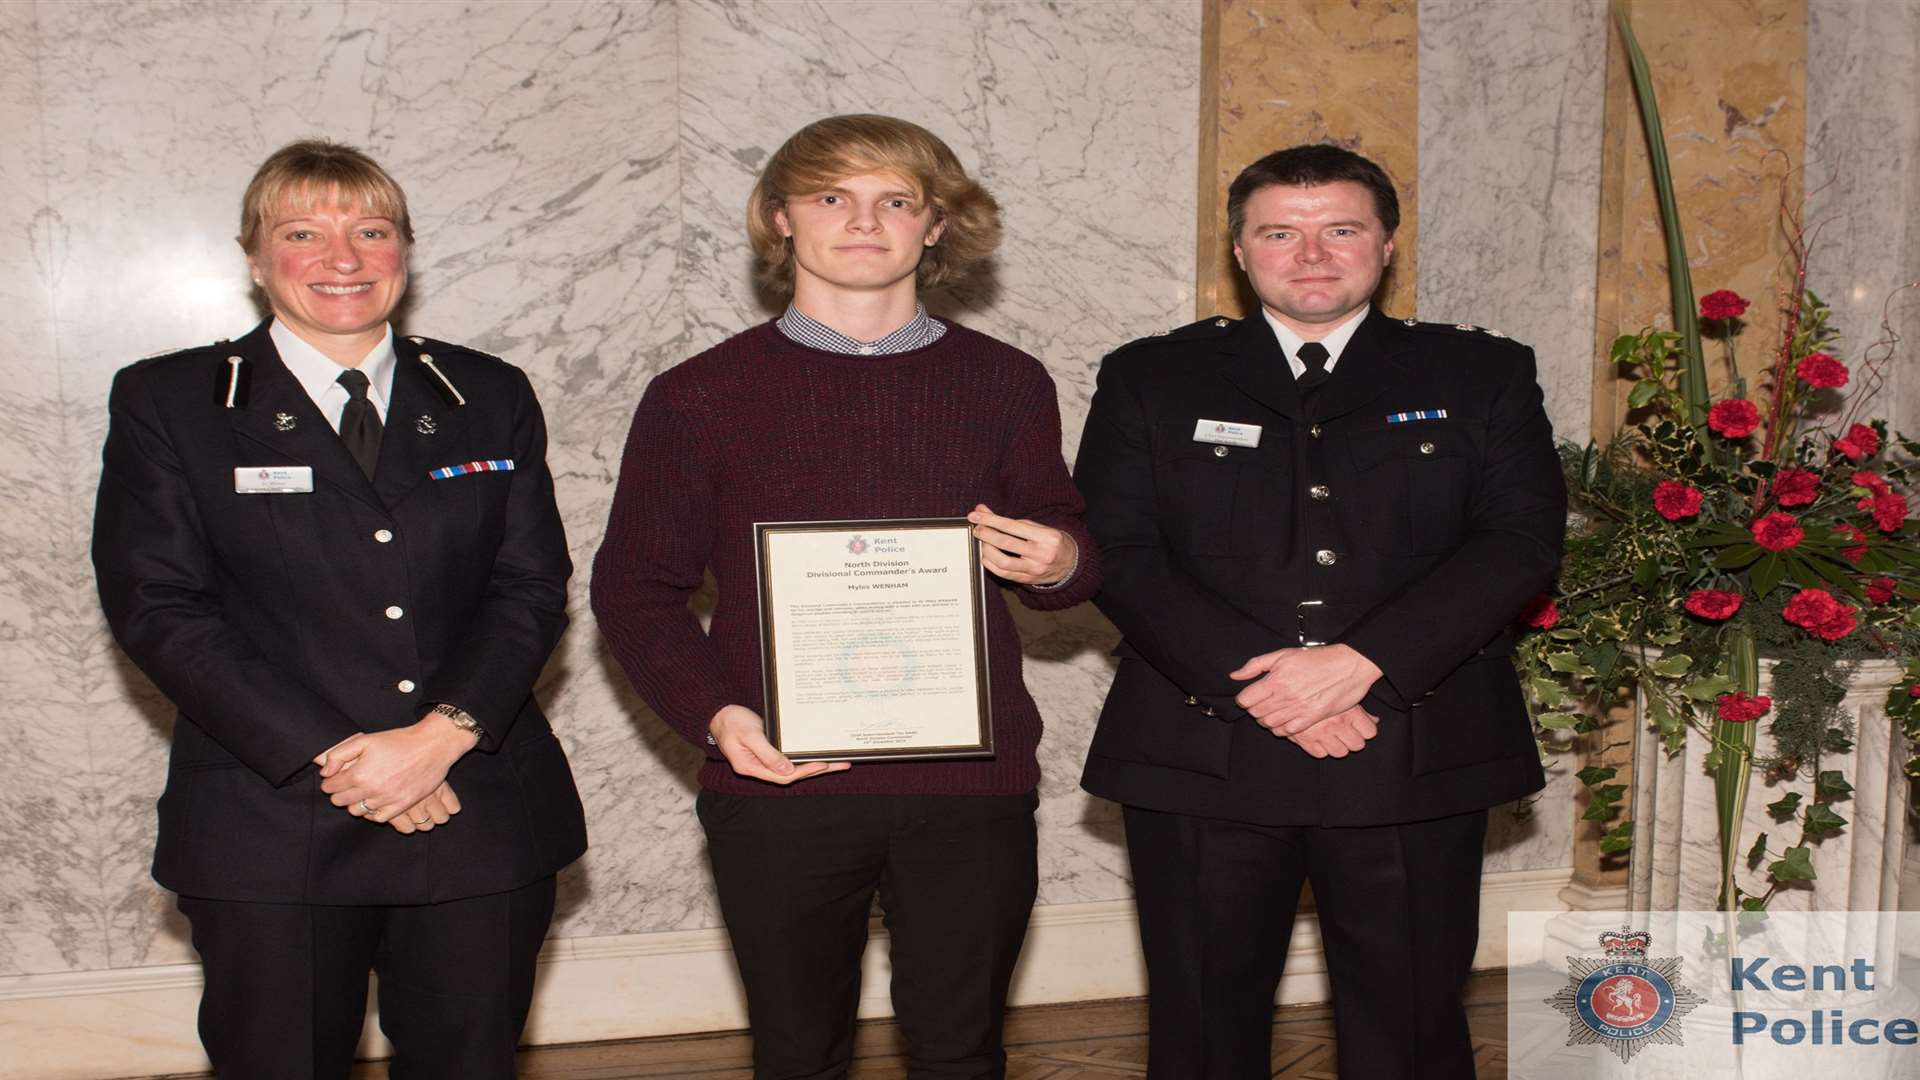 Myles Wenham with Assistant Chief Constable Jo Shiner and Chief Superintendent Tim Smith